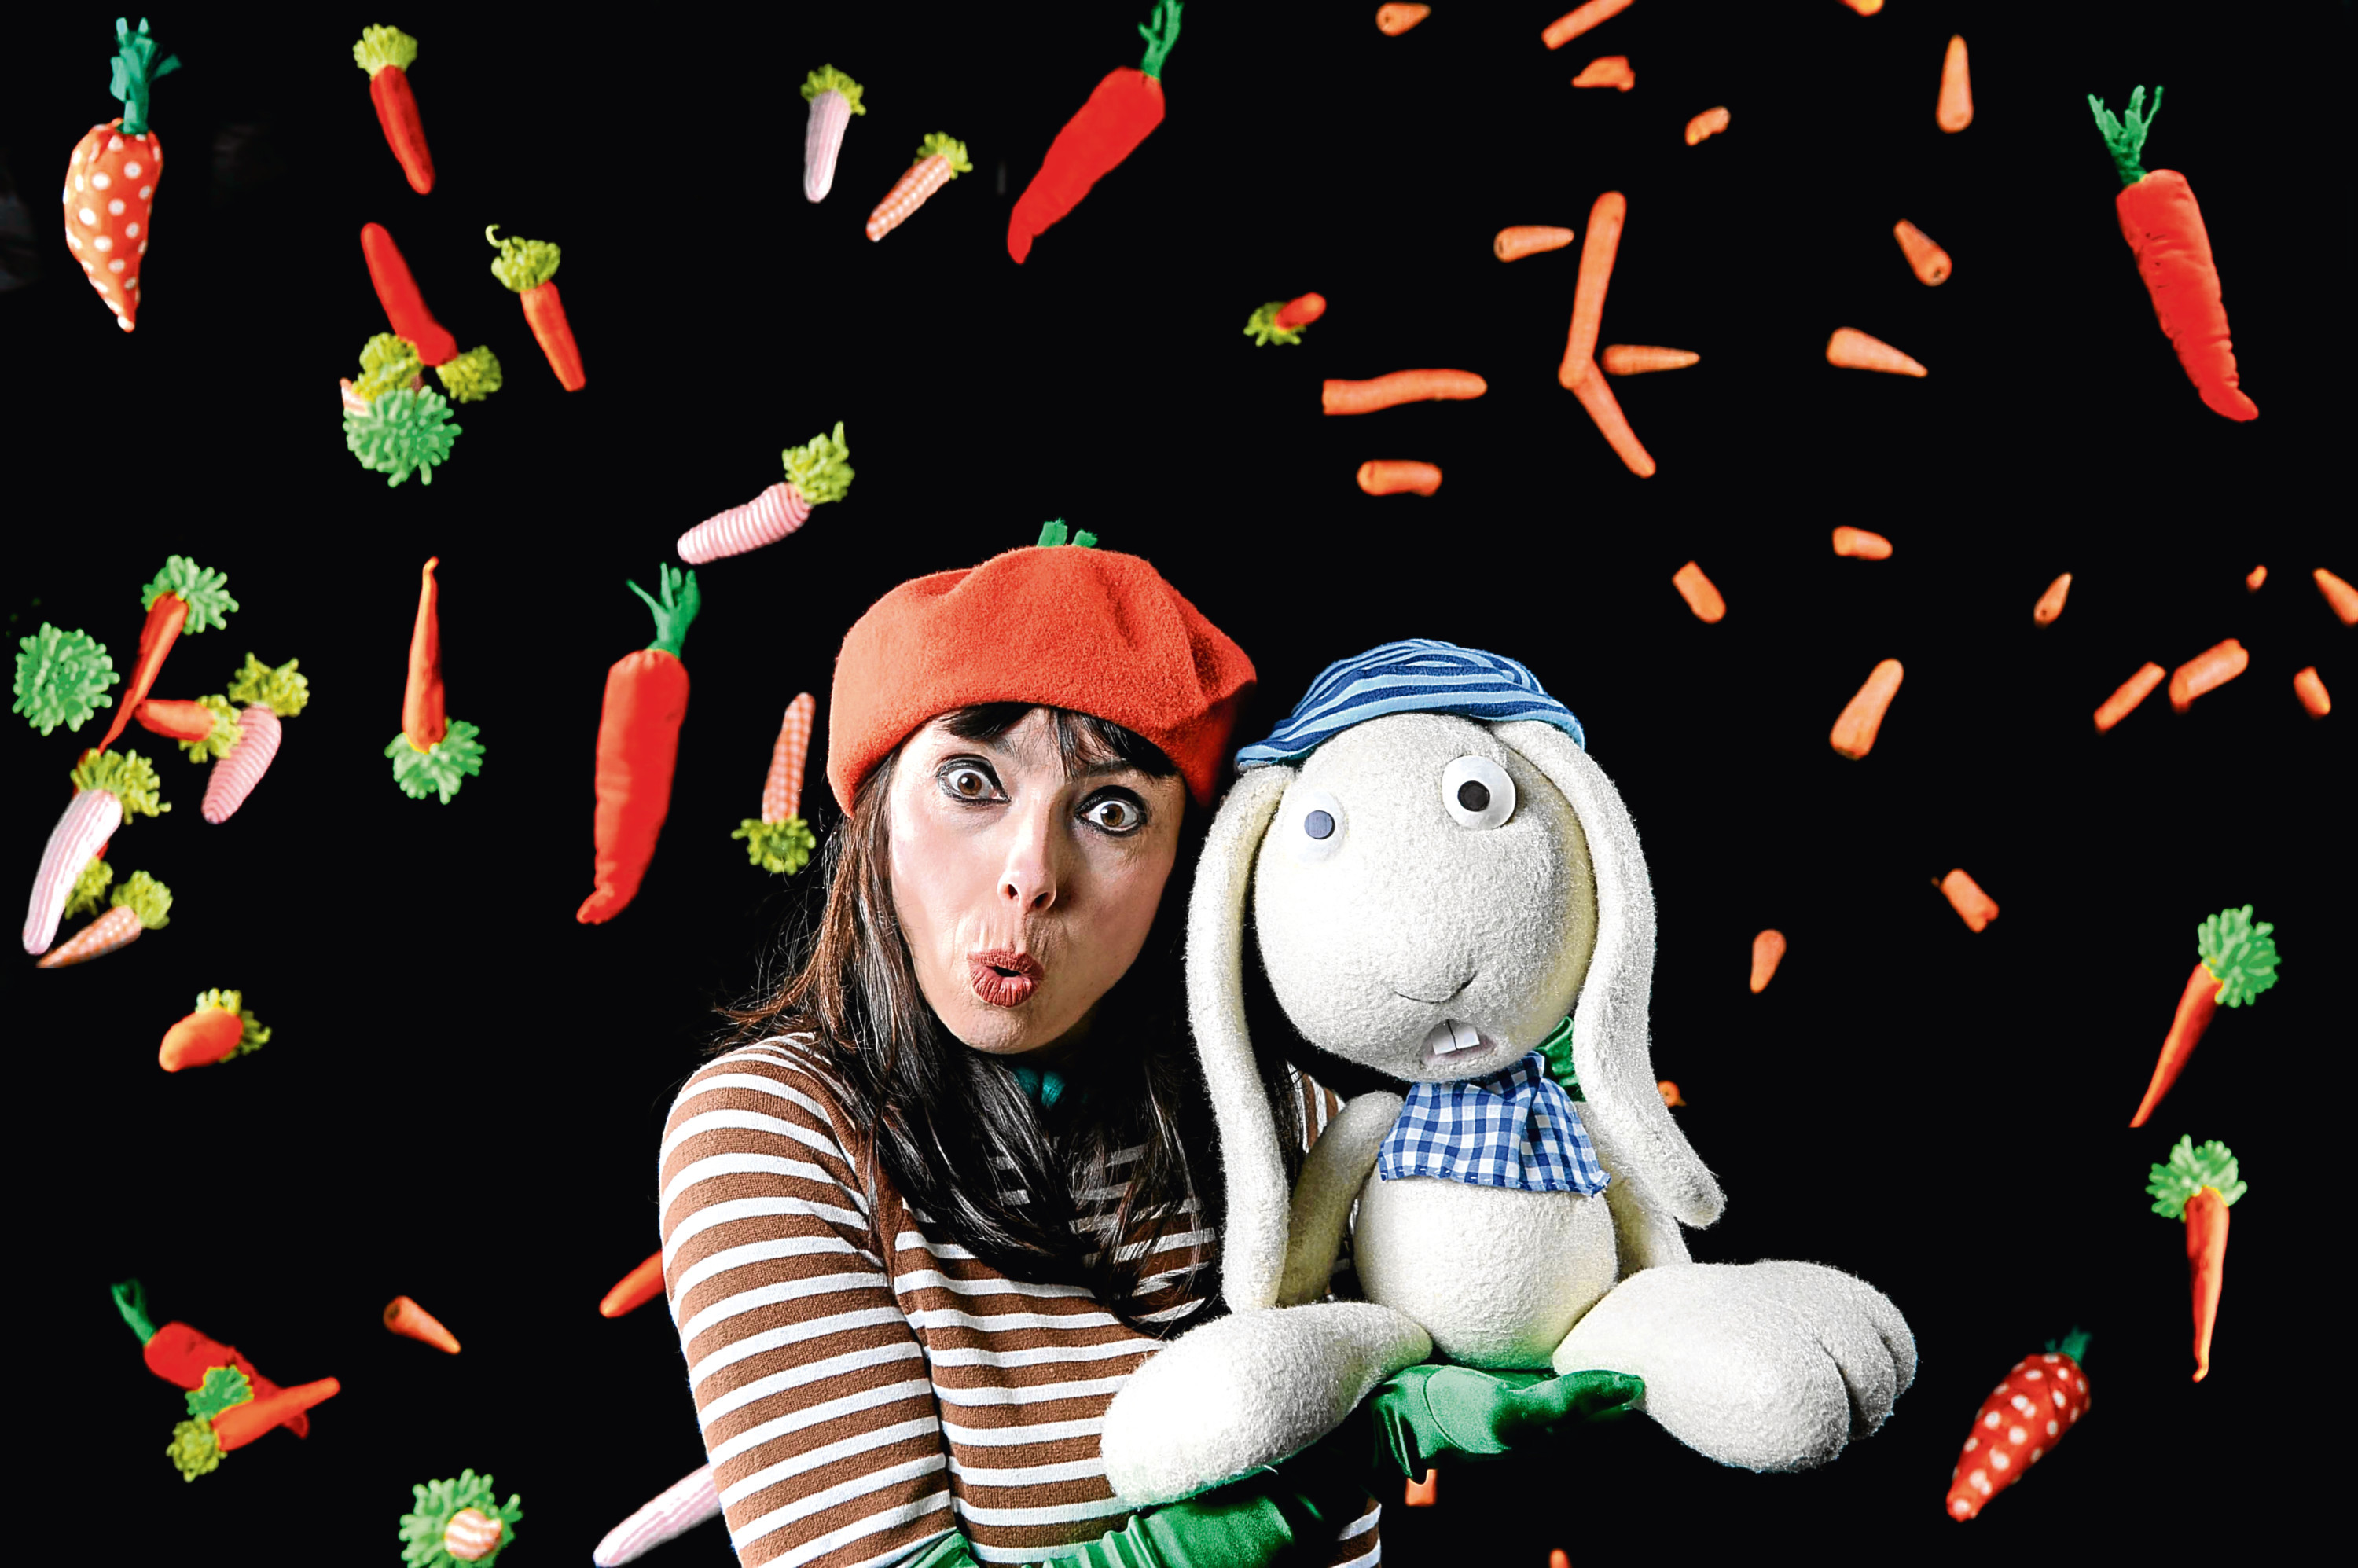 The Puppet Animation Festival runs from March 24 to April 14.